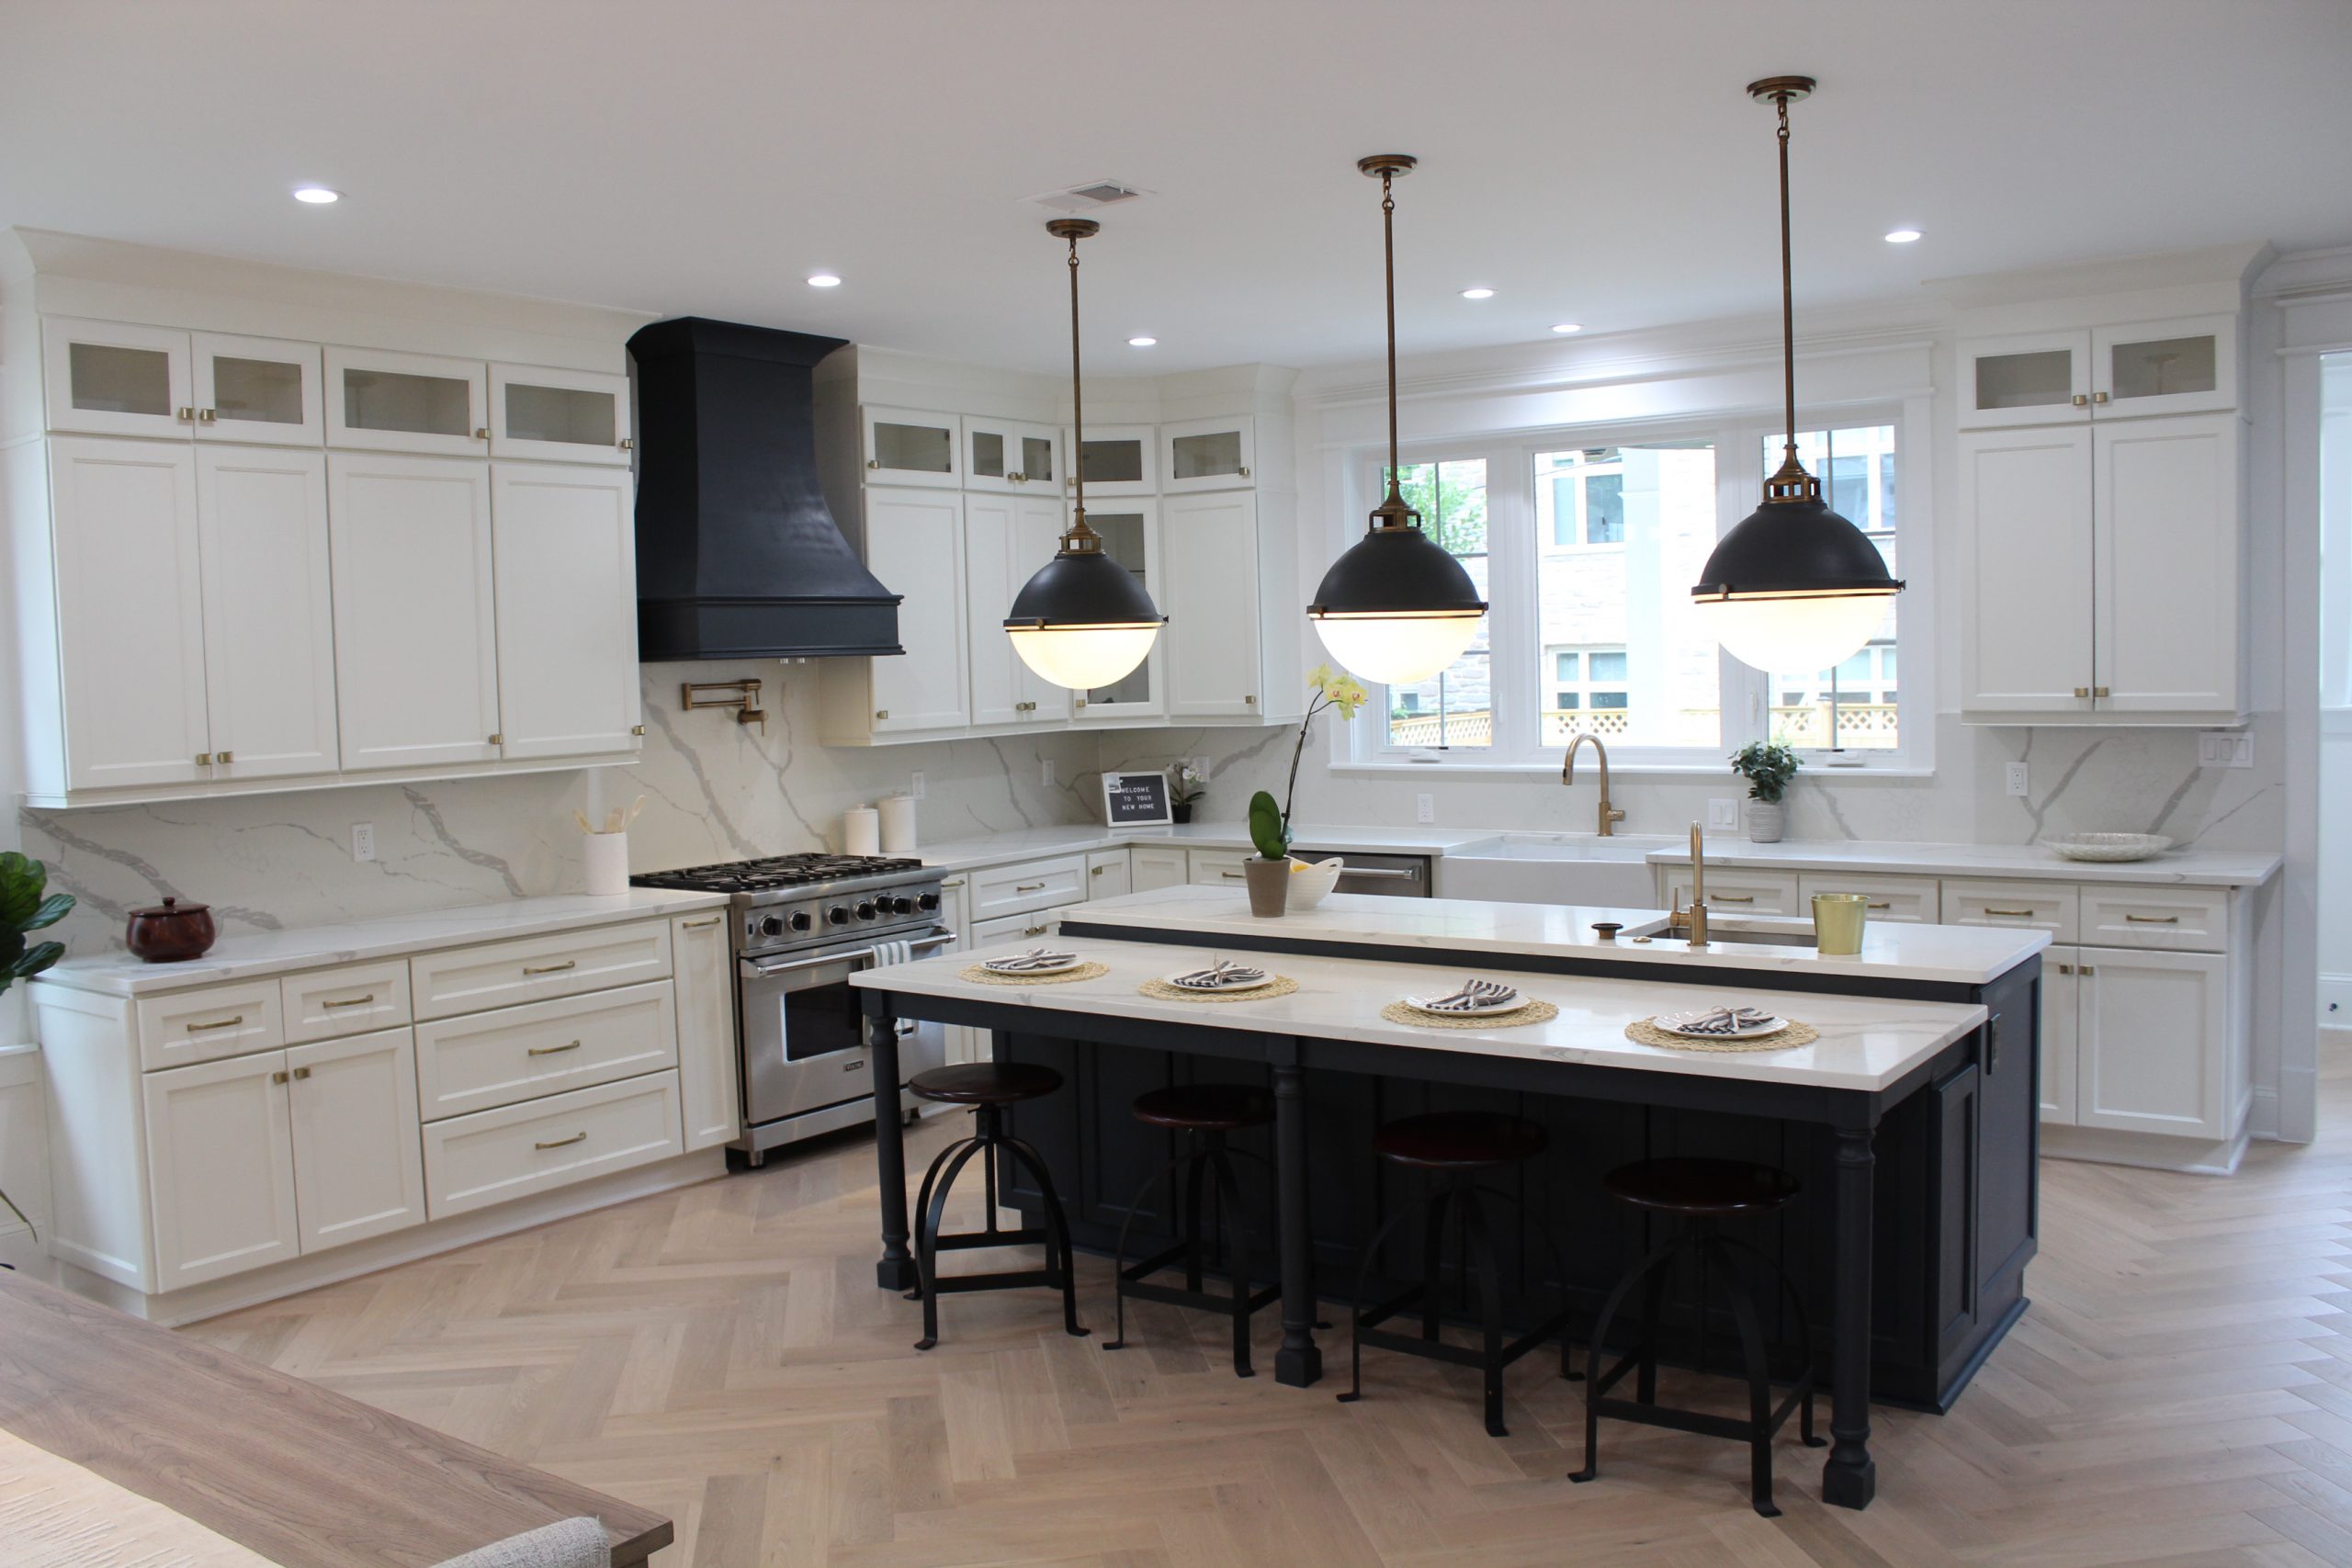 E1 Dove And E2 Charcoal Cabinets By Jandk Cabinetry Erva Stone And Design